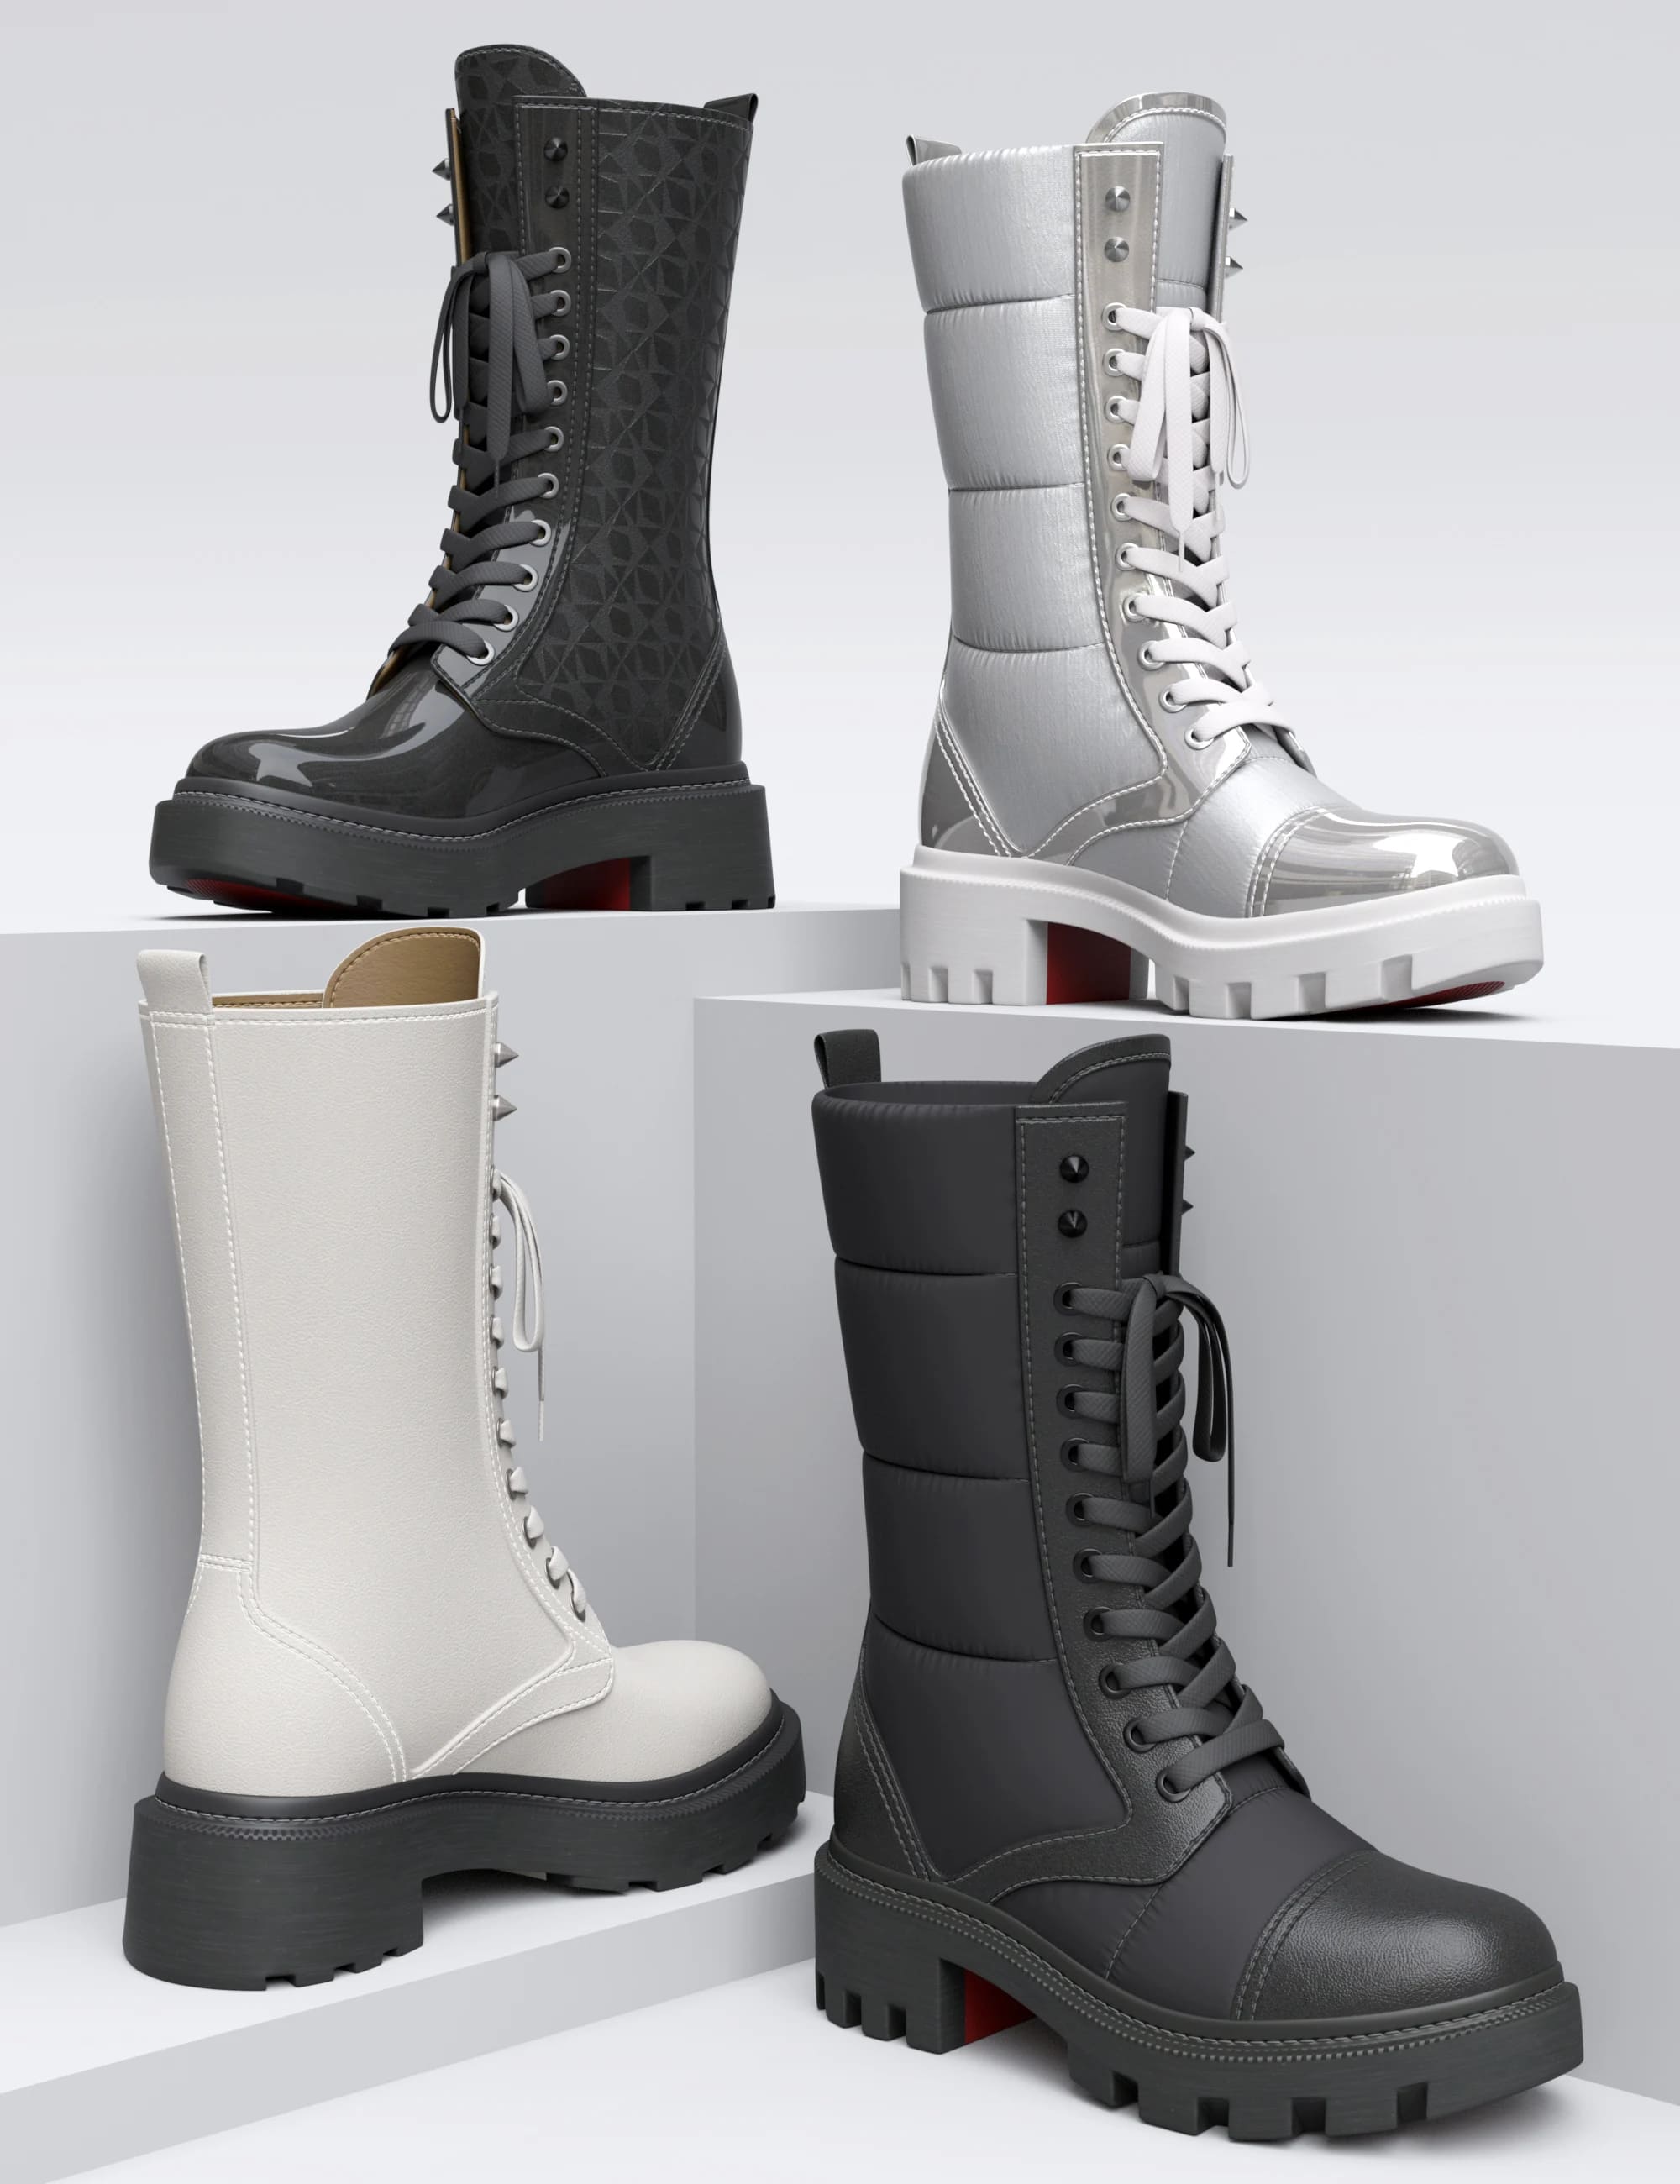 HL High Boots for Genesis 8, 8.1 Female and Genesis 9_DAZ3D下载站